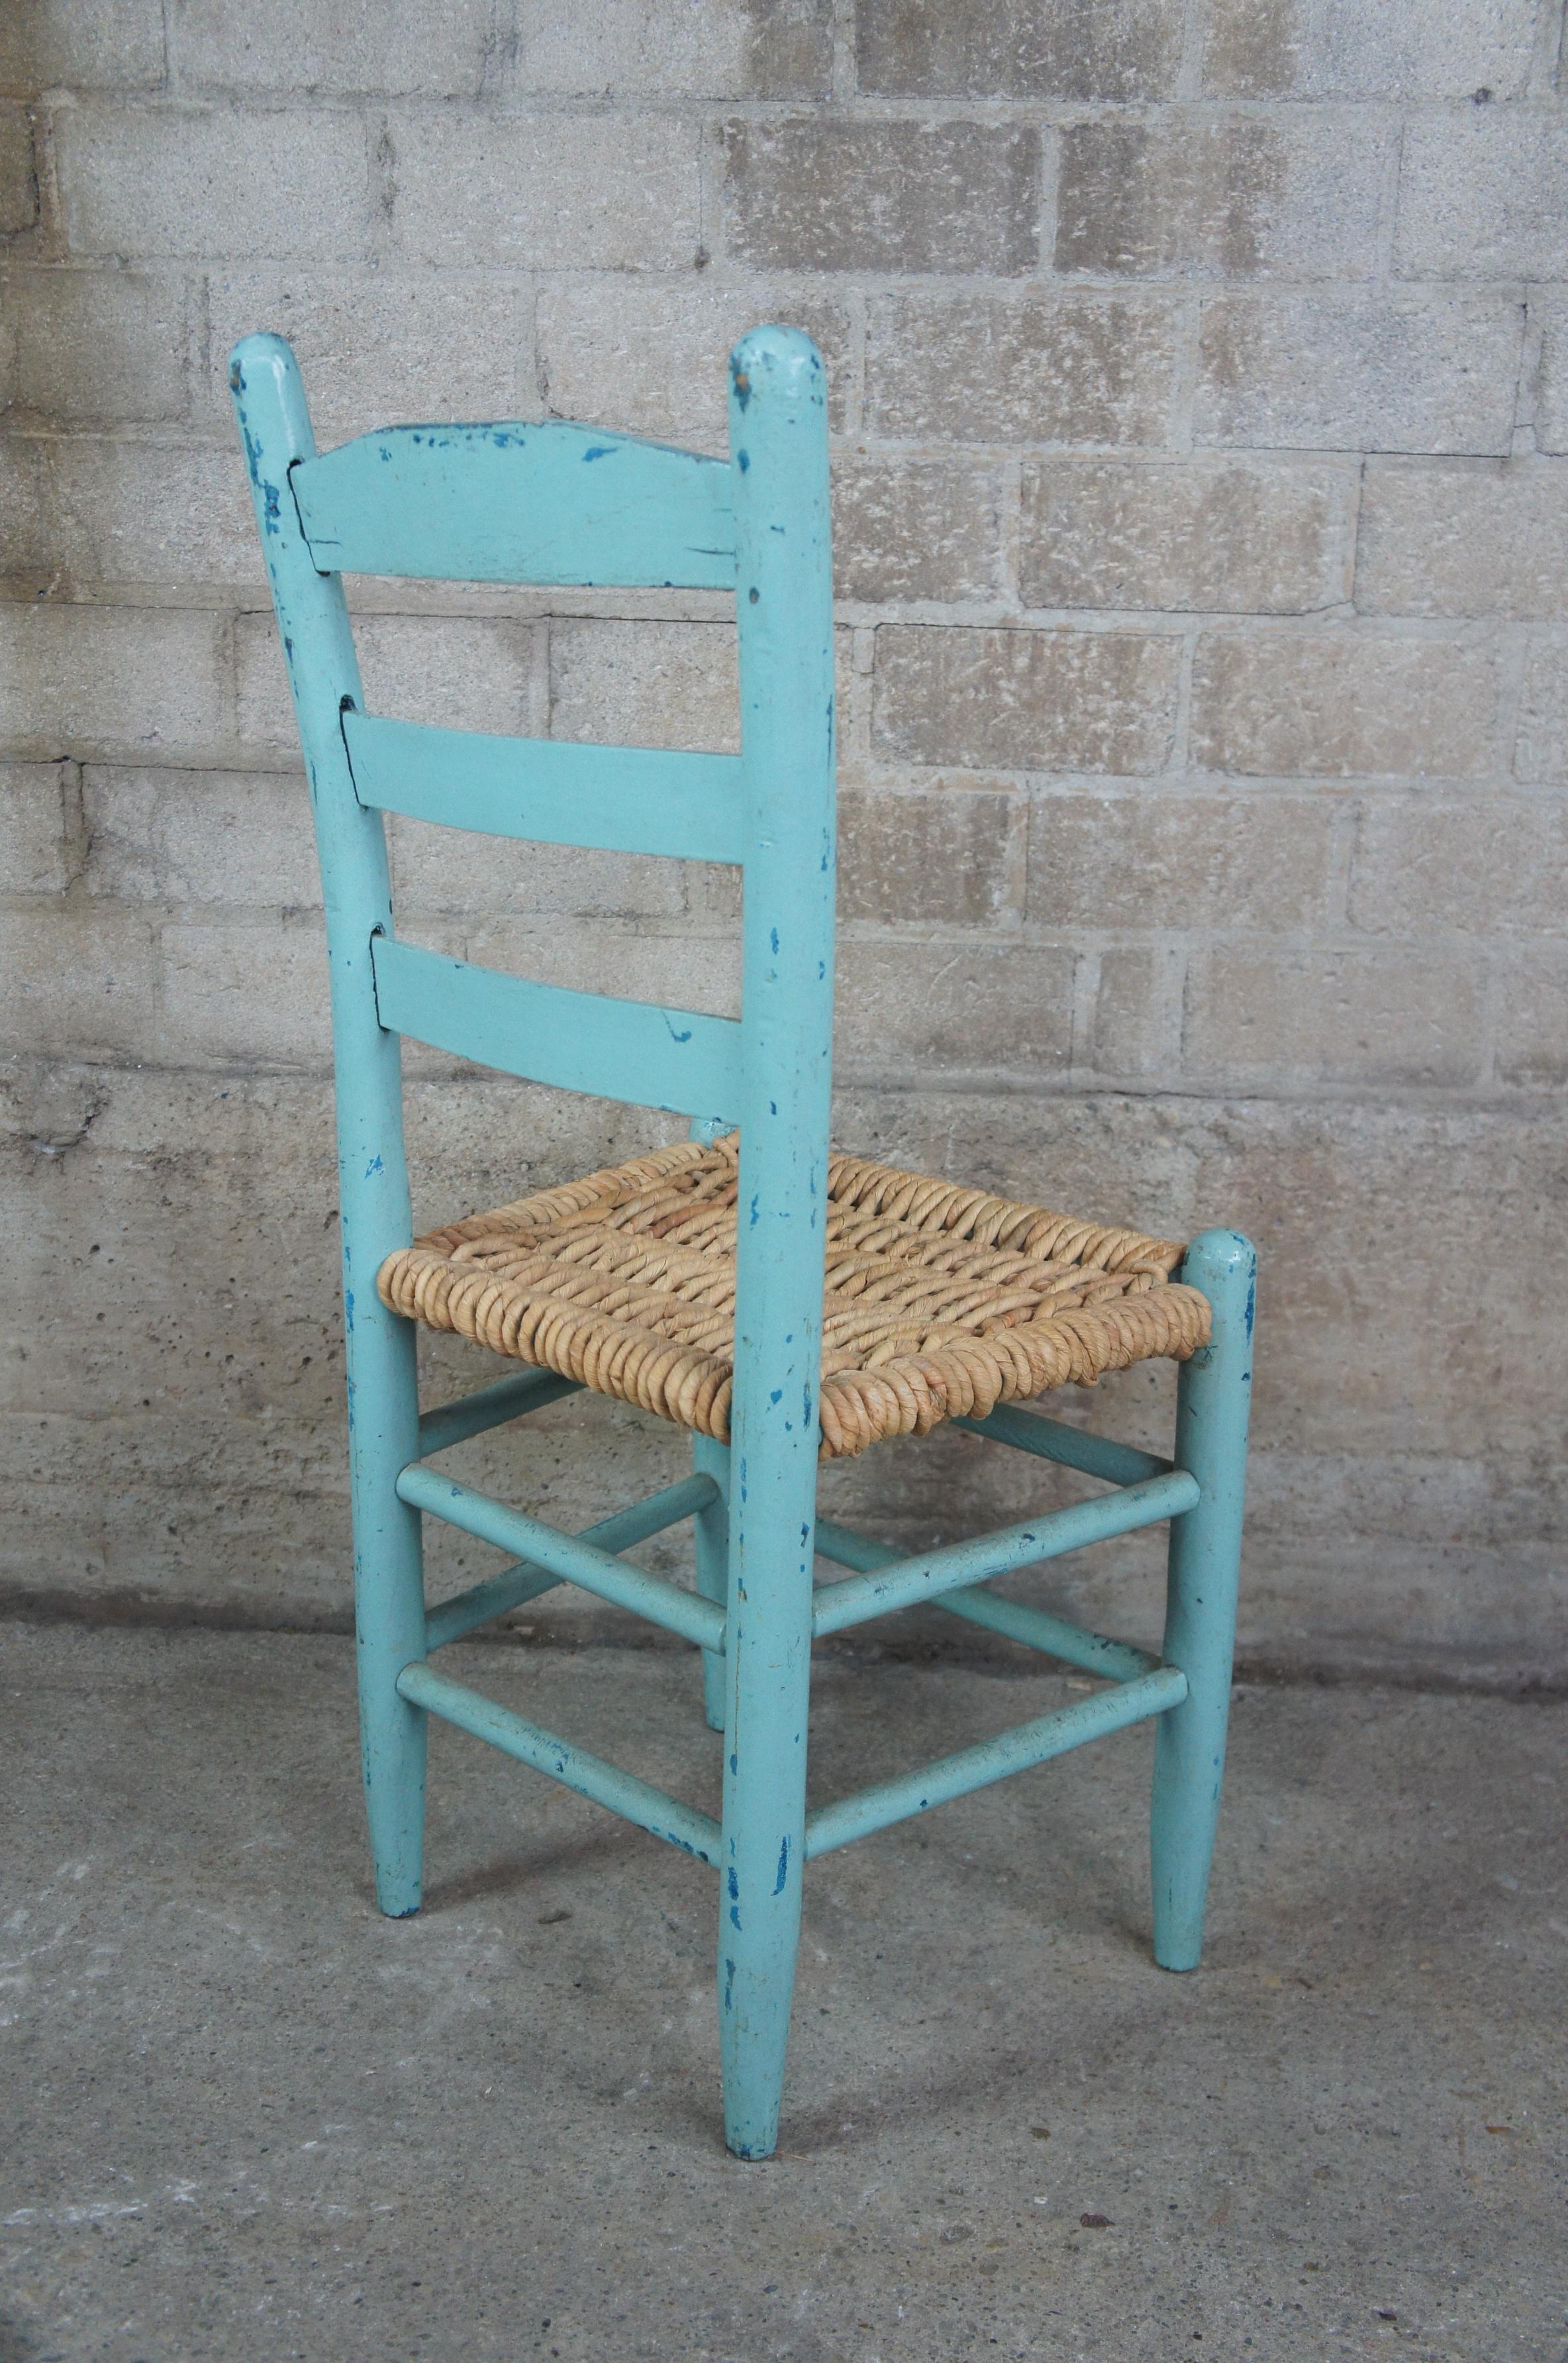 Bohemian Vintage Shaker Ladder Back Turquoise Boho Chic Dining Side Chair with Jute Seat